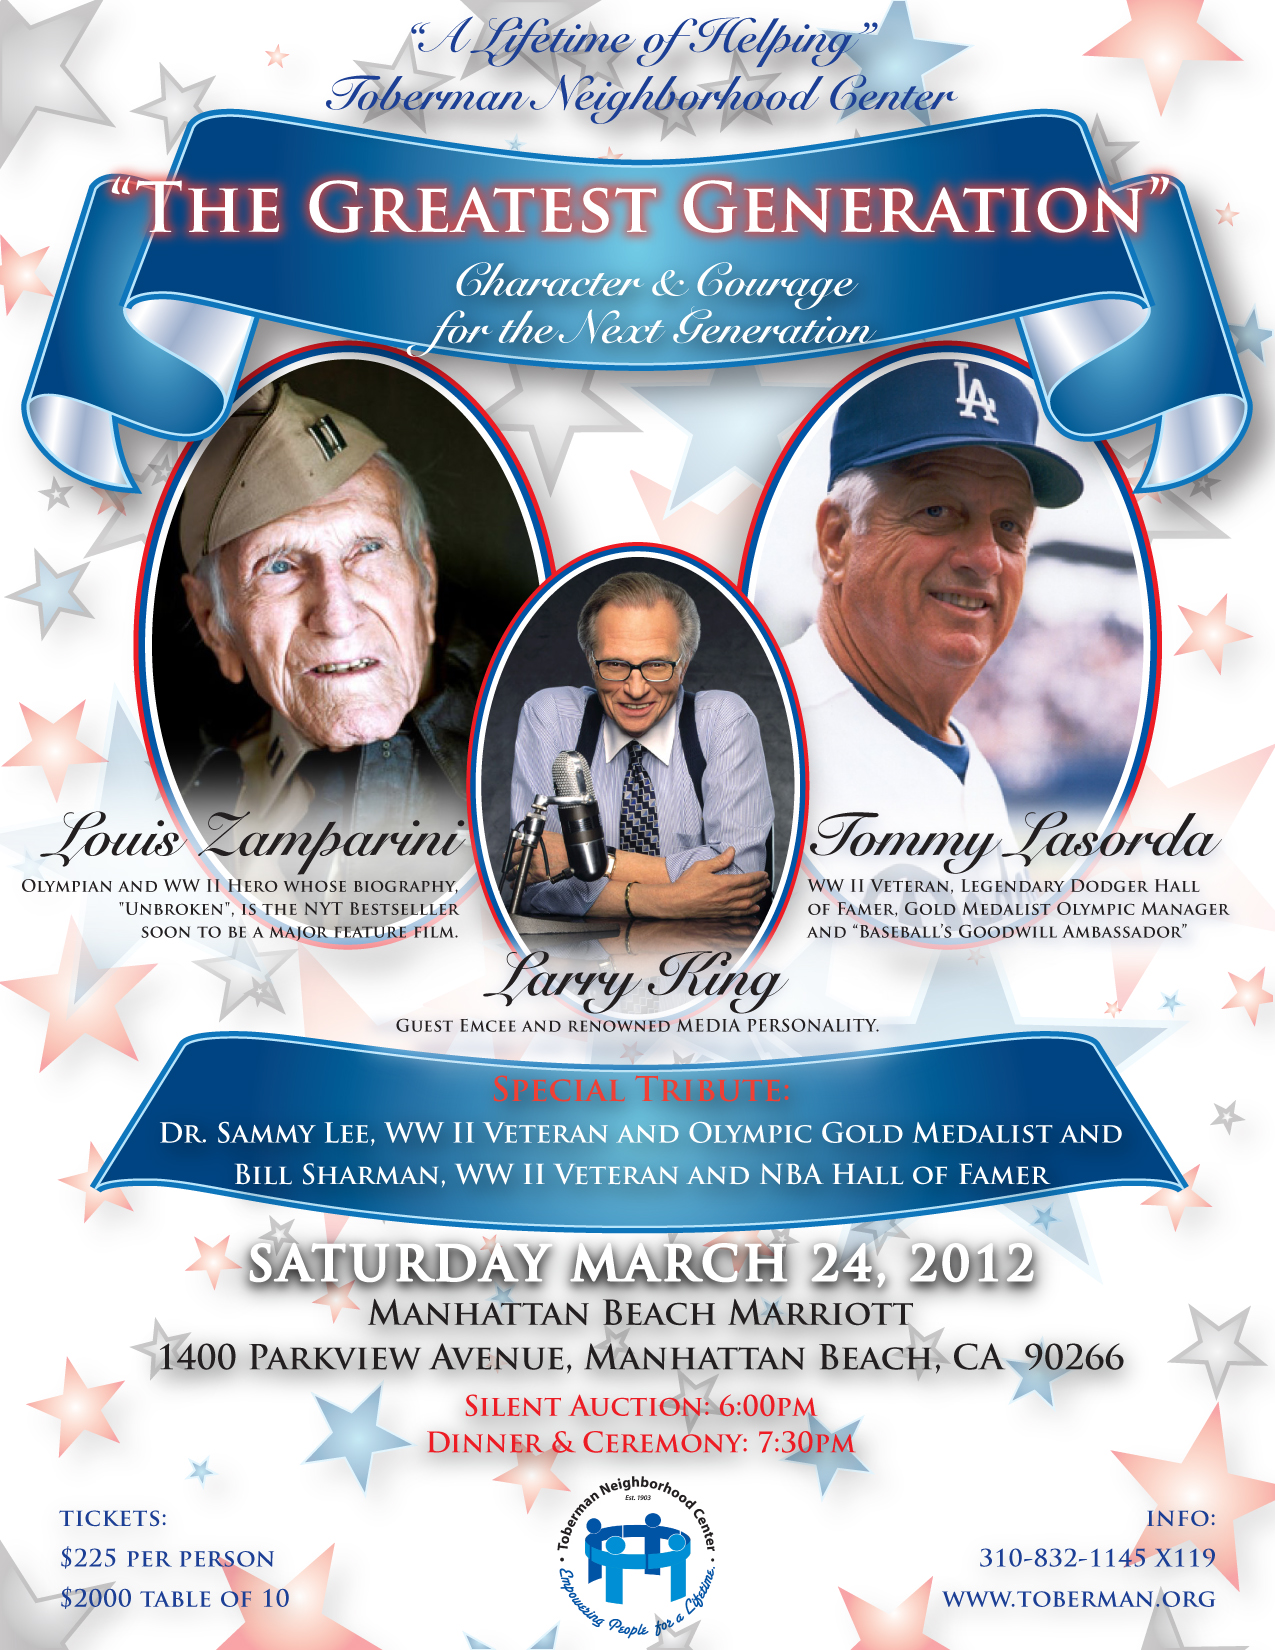 The Greatest Generation event